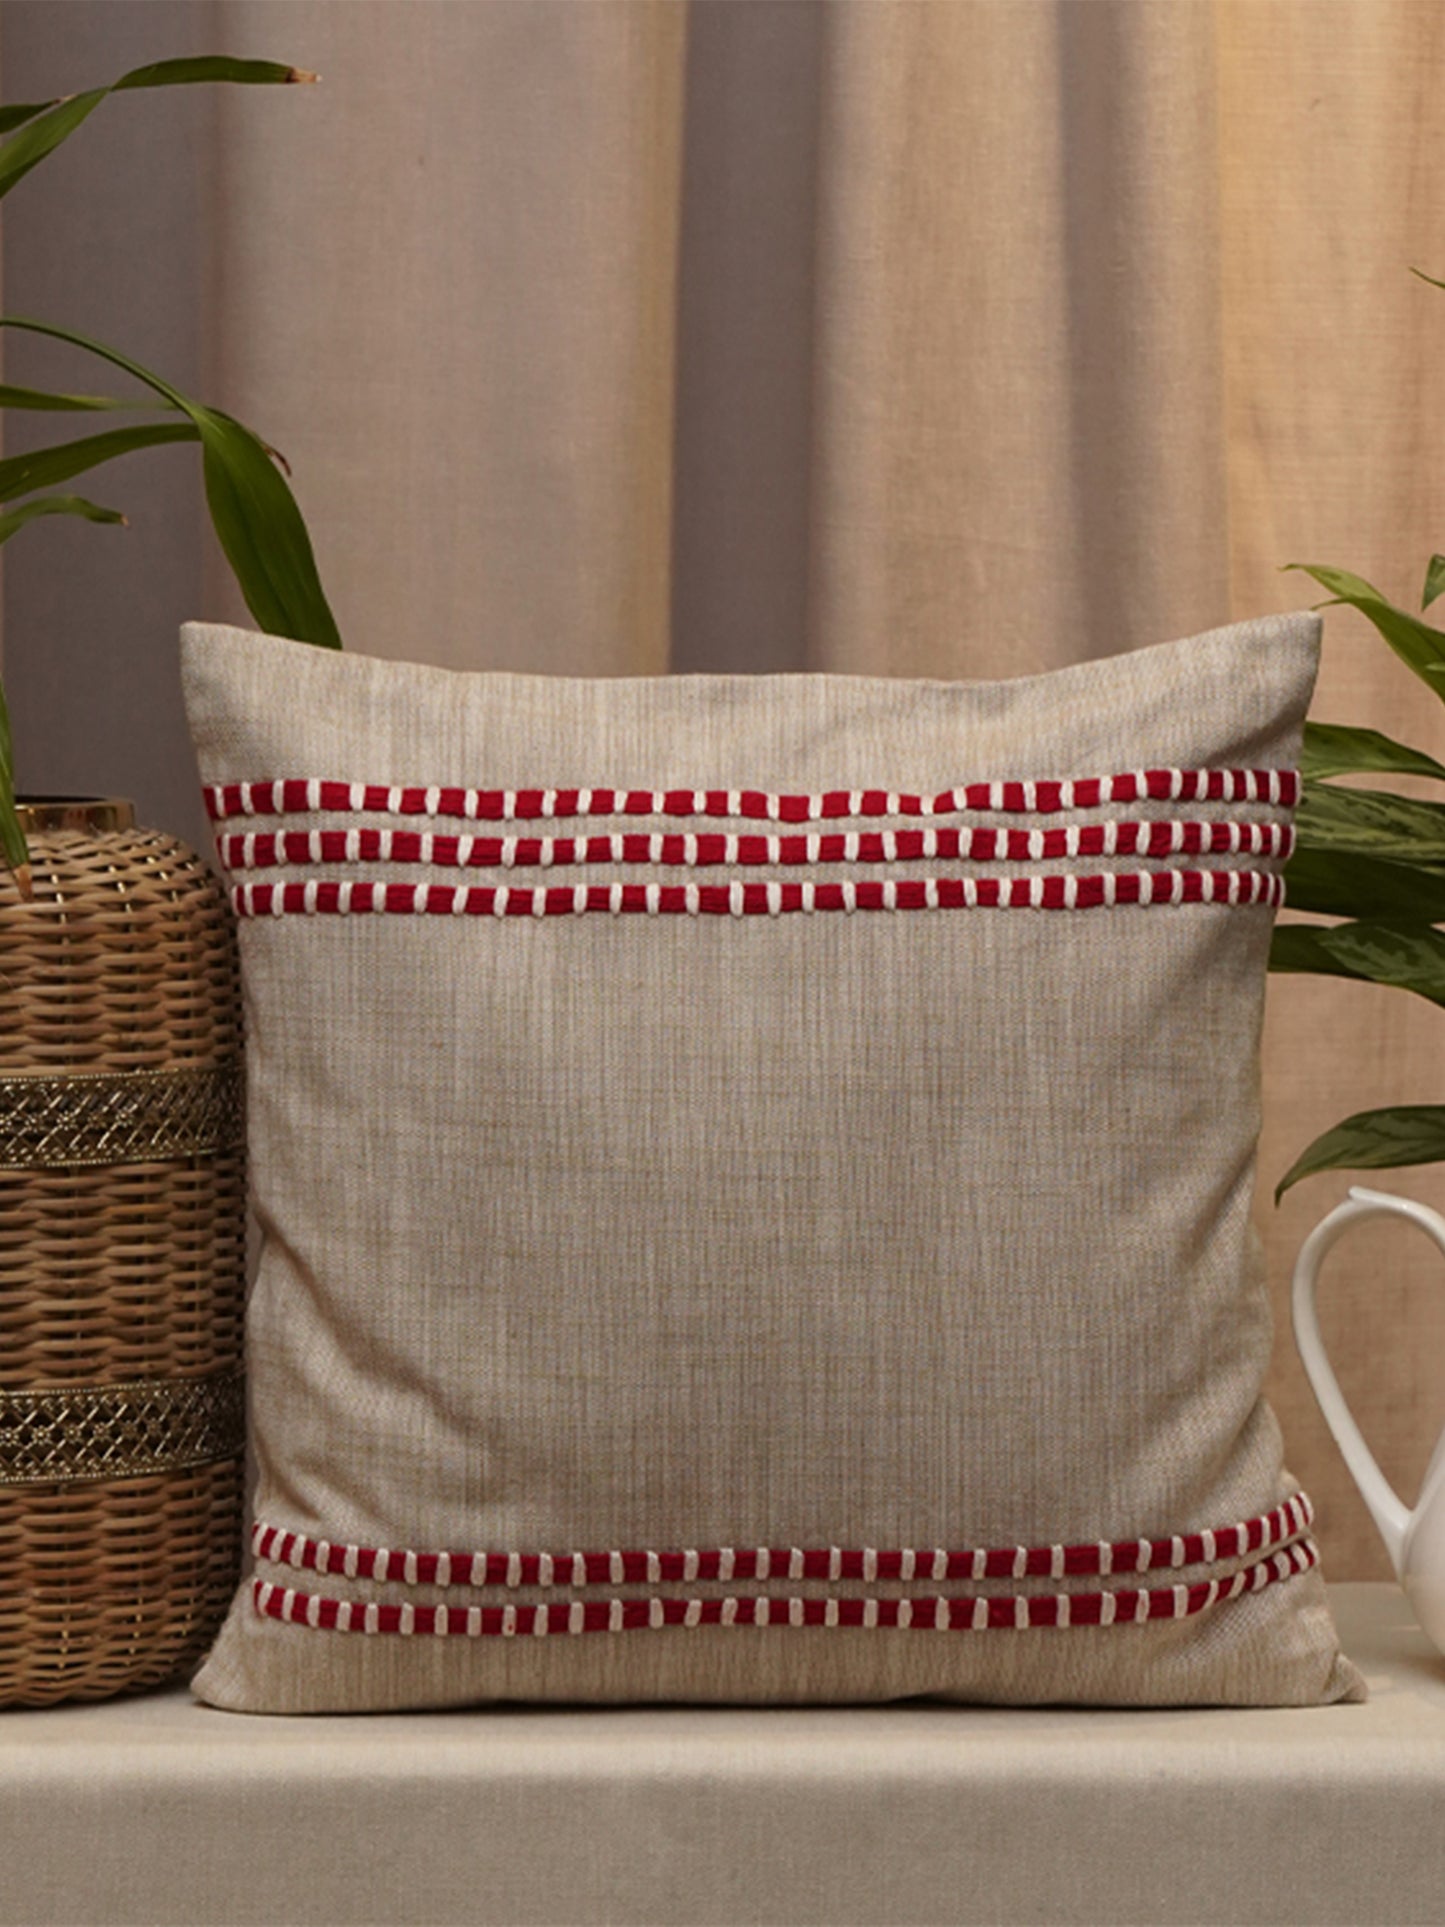 Embroidered Cushion Cover Cotton Blend  Beige - 16" X 16"